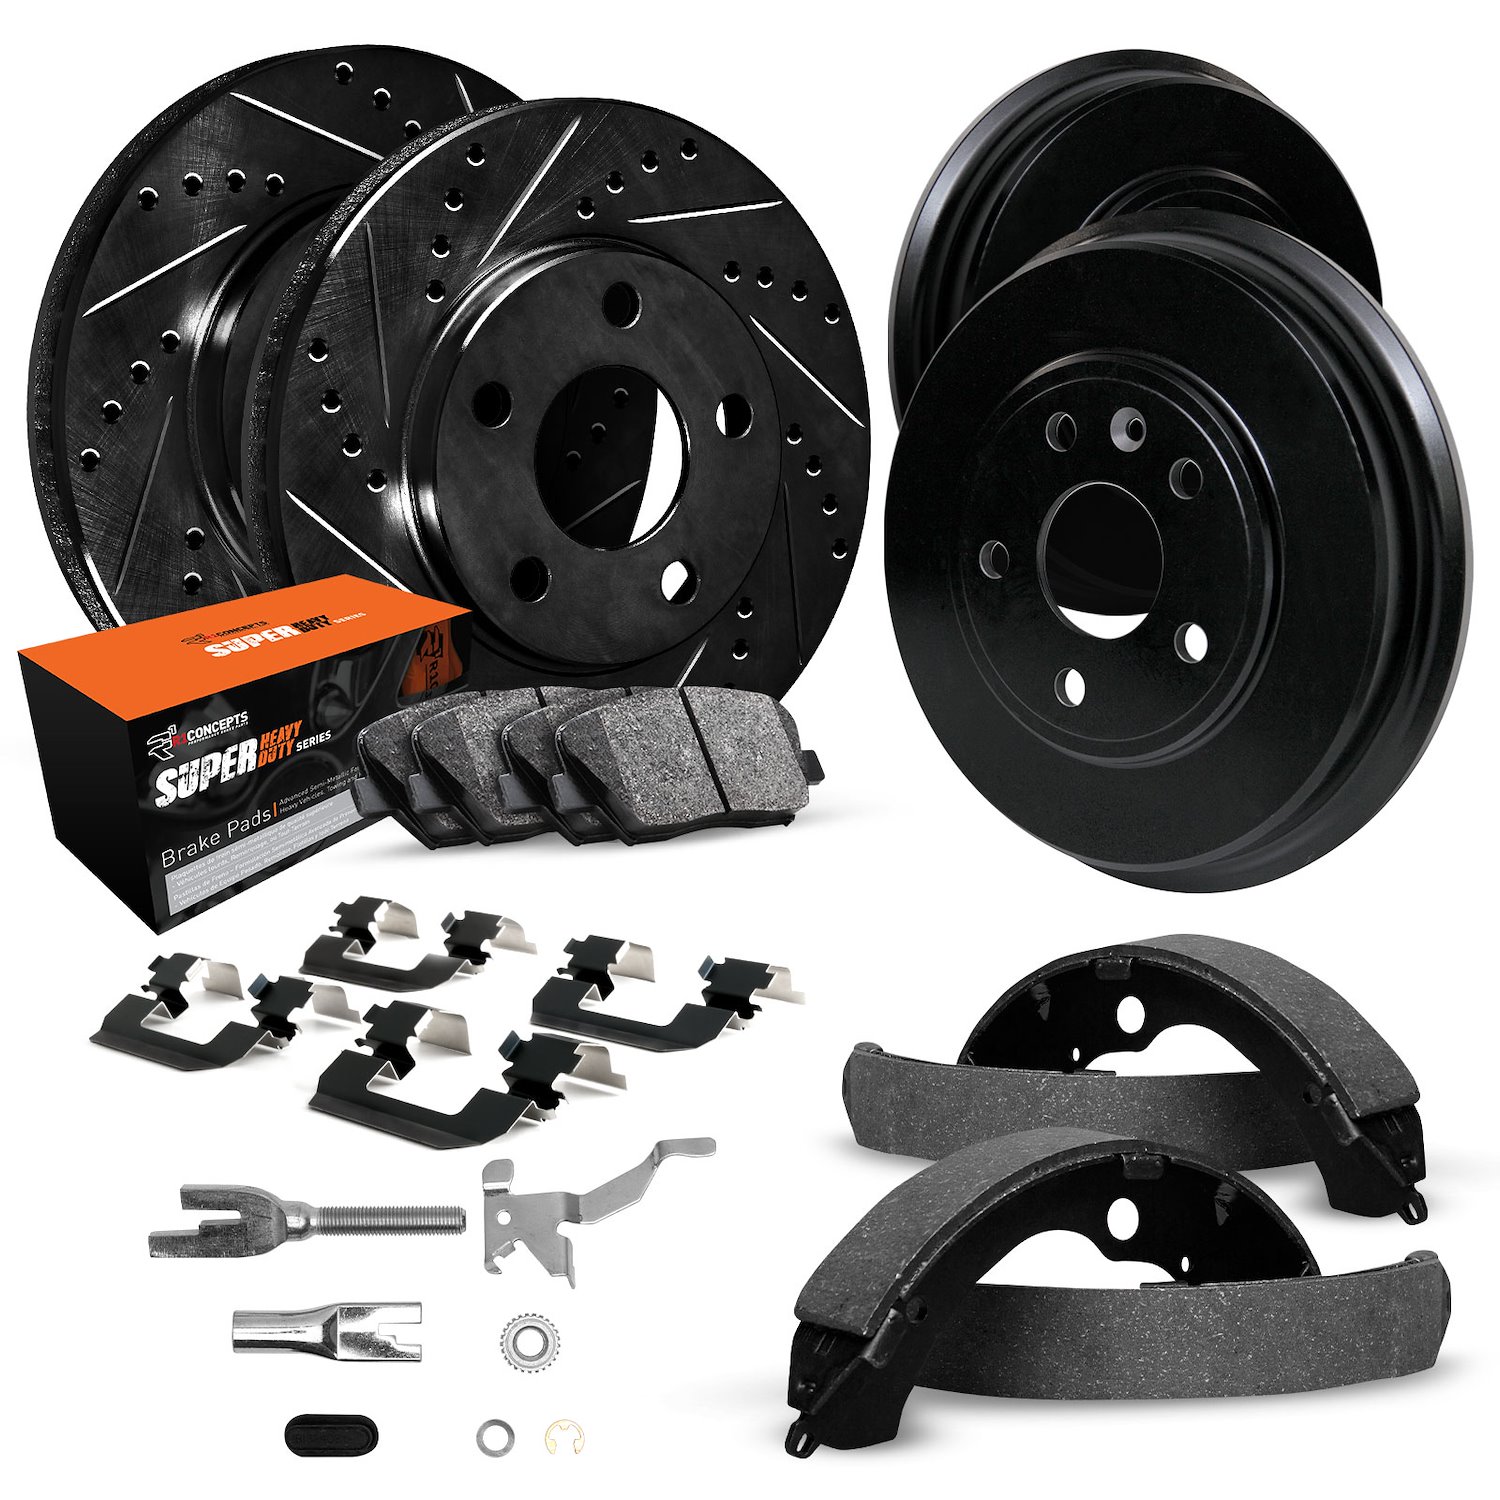 E-Line Drilled/Slotted Black Rotor & Drum Set w/Super-Duty Pads, Shoes, Hardware/Adjusters, 1983-1991 Ford/Lincoln/Mercury/Mazda